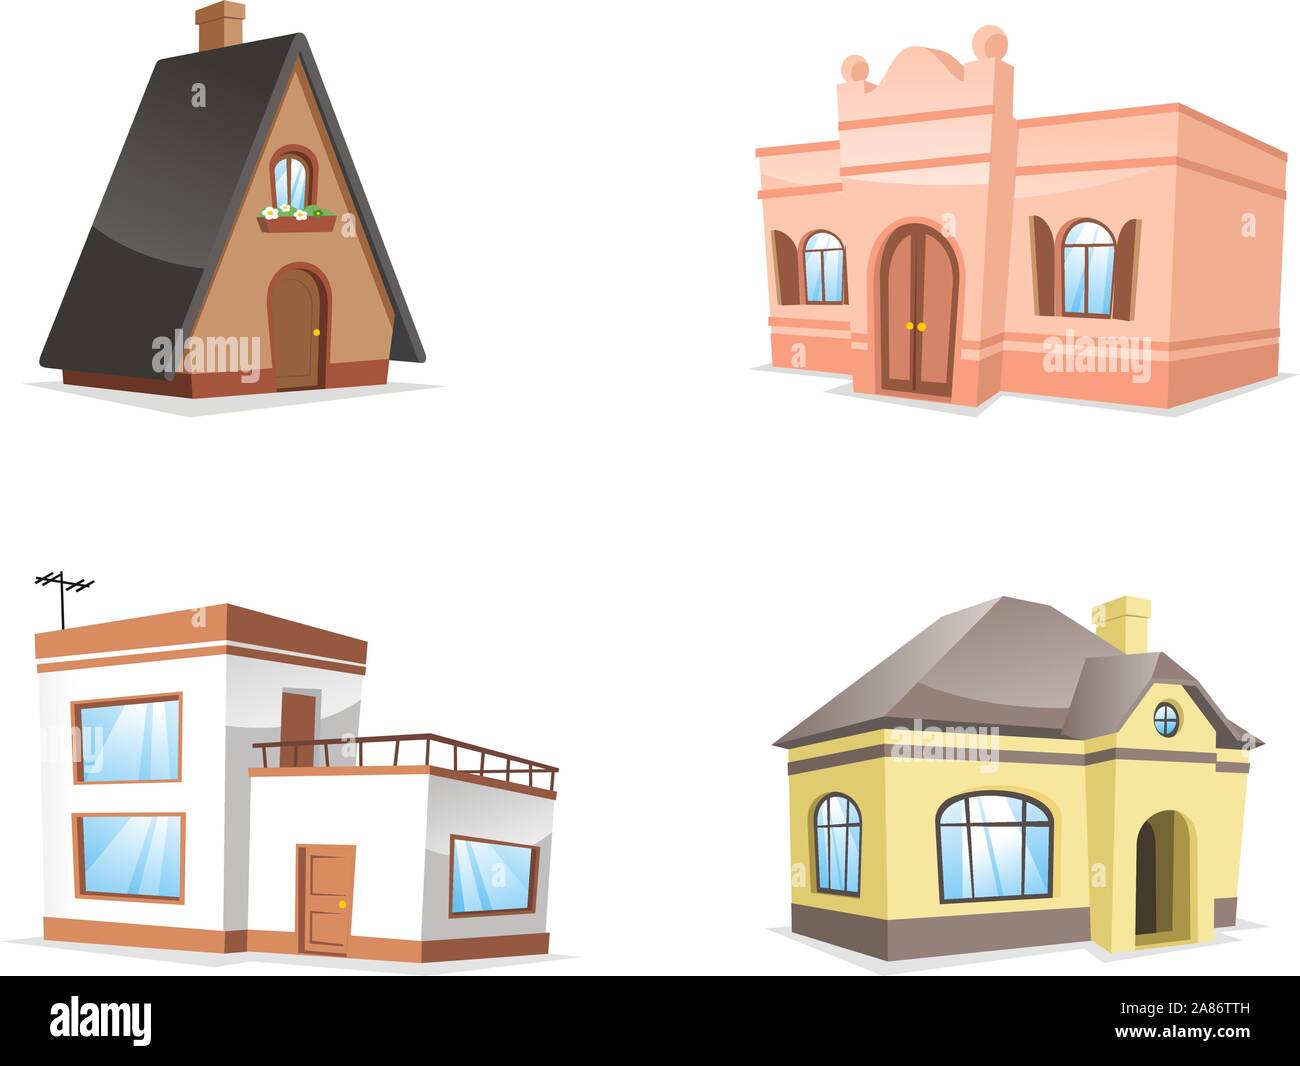 residential house set. with Hotel, Inn, Mansion, Pension, Row House, Farmhouse, House, Roof, Roof Tile vector illustration. Stock Vector